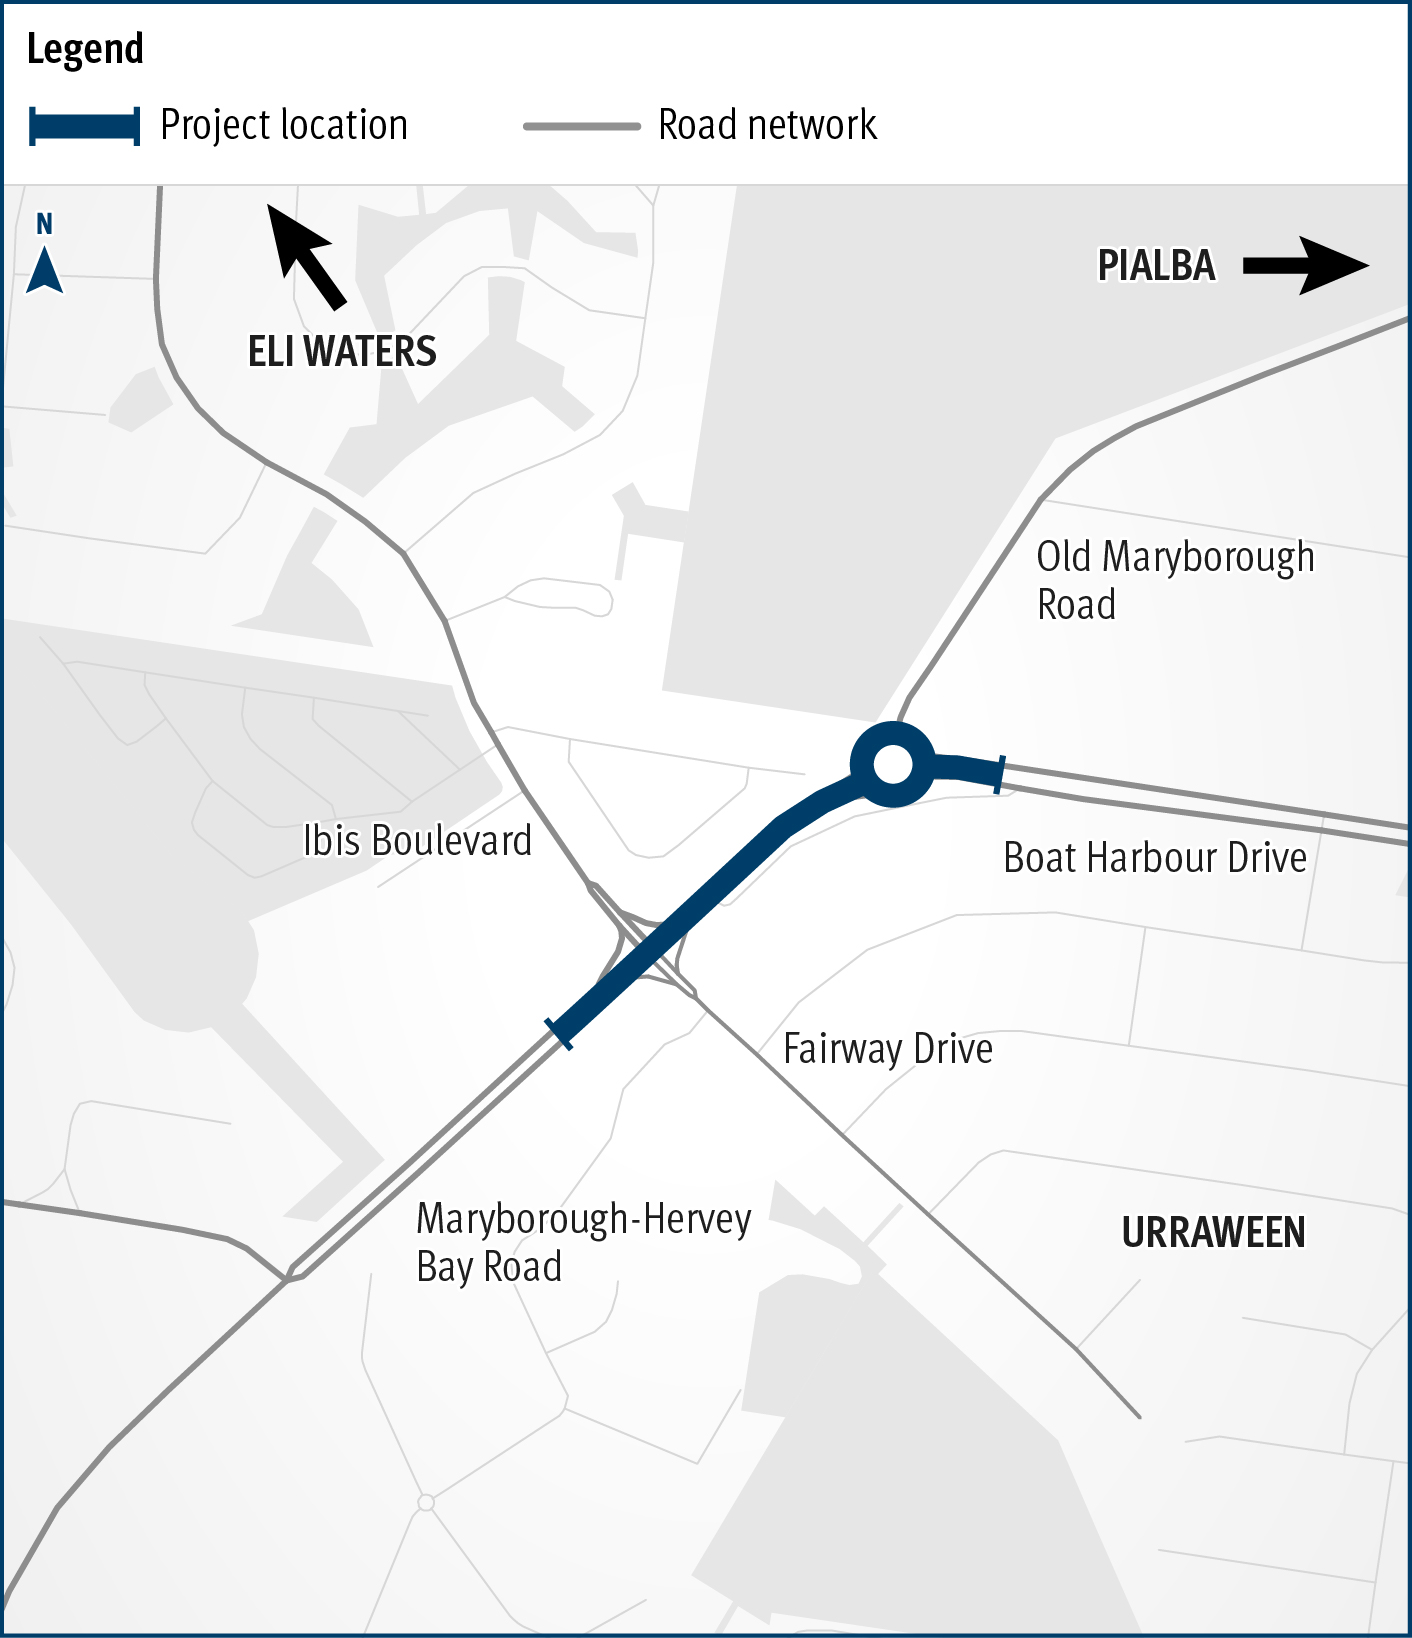 Maryborough-Hervey Bay Road, Ibis Boulevard and Fairway Drive intersection, Eli Waters location map